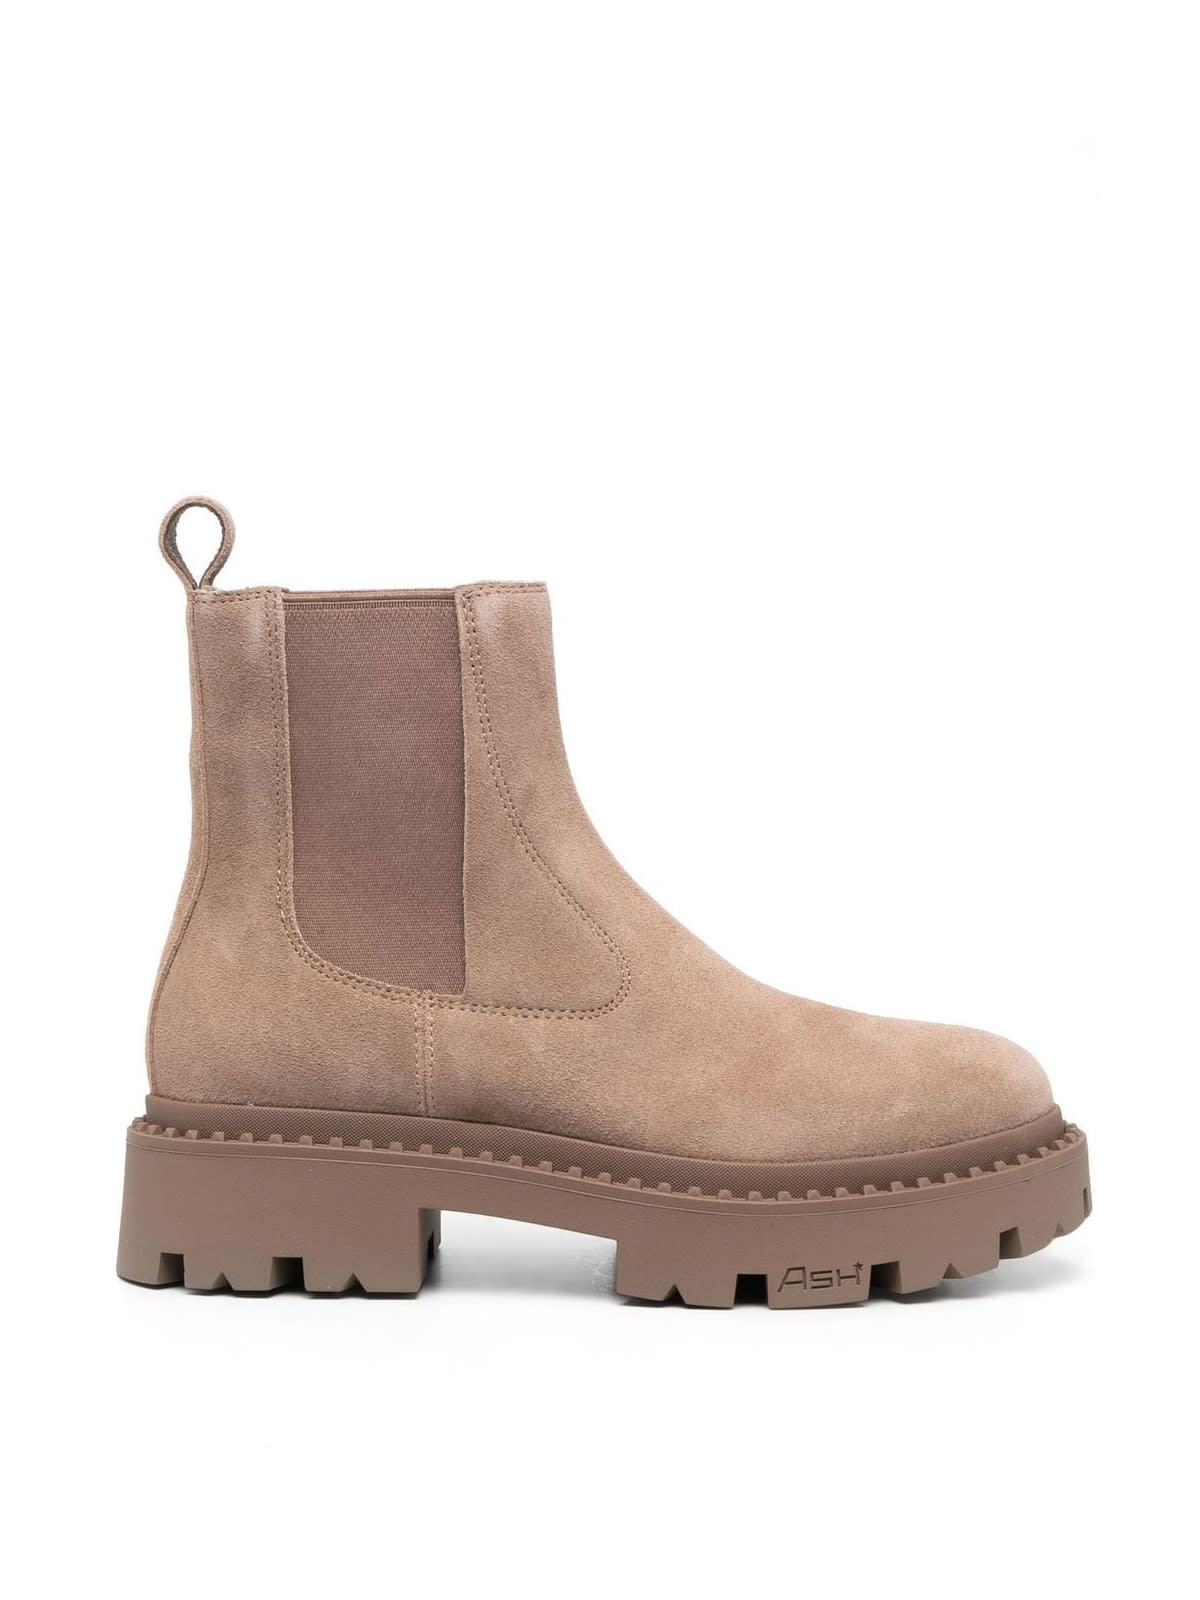 Ash Genesis Baby Soft Sequoia Boots